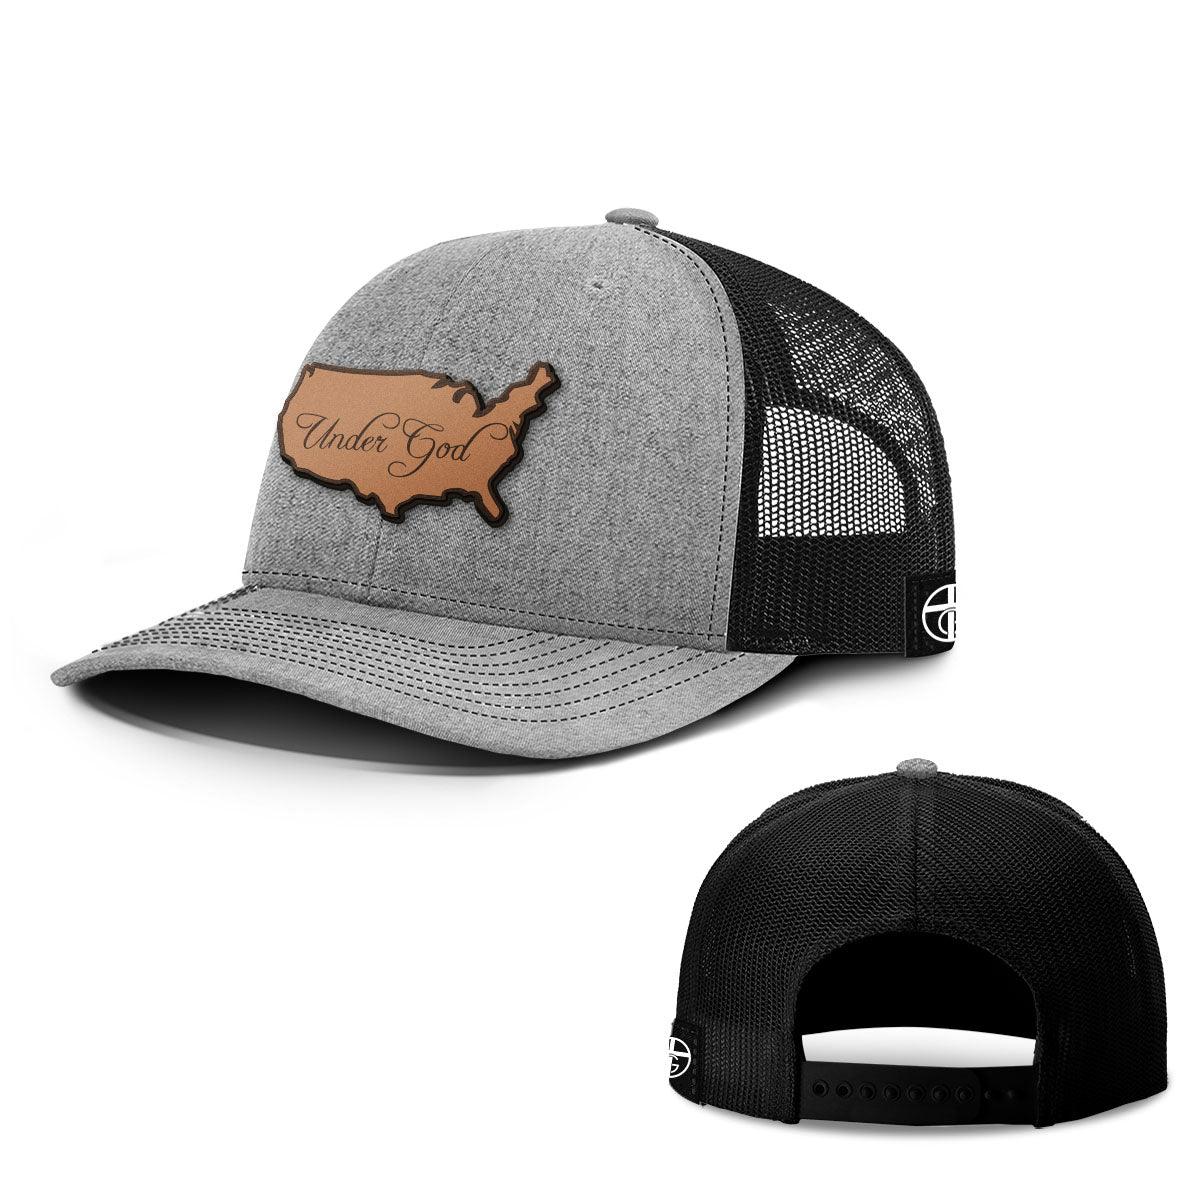 Under God Leather Patch Hats